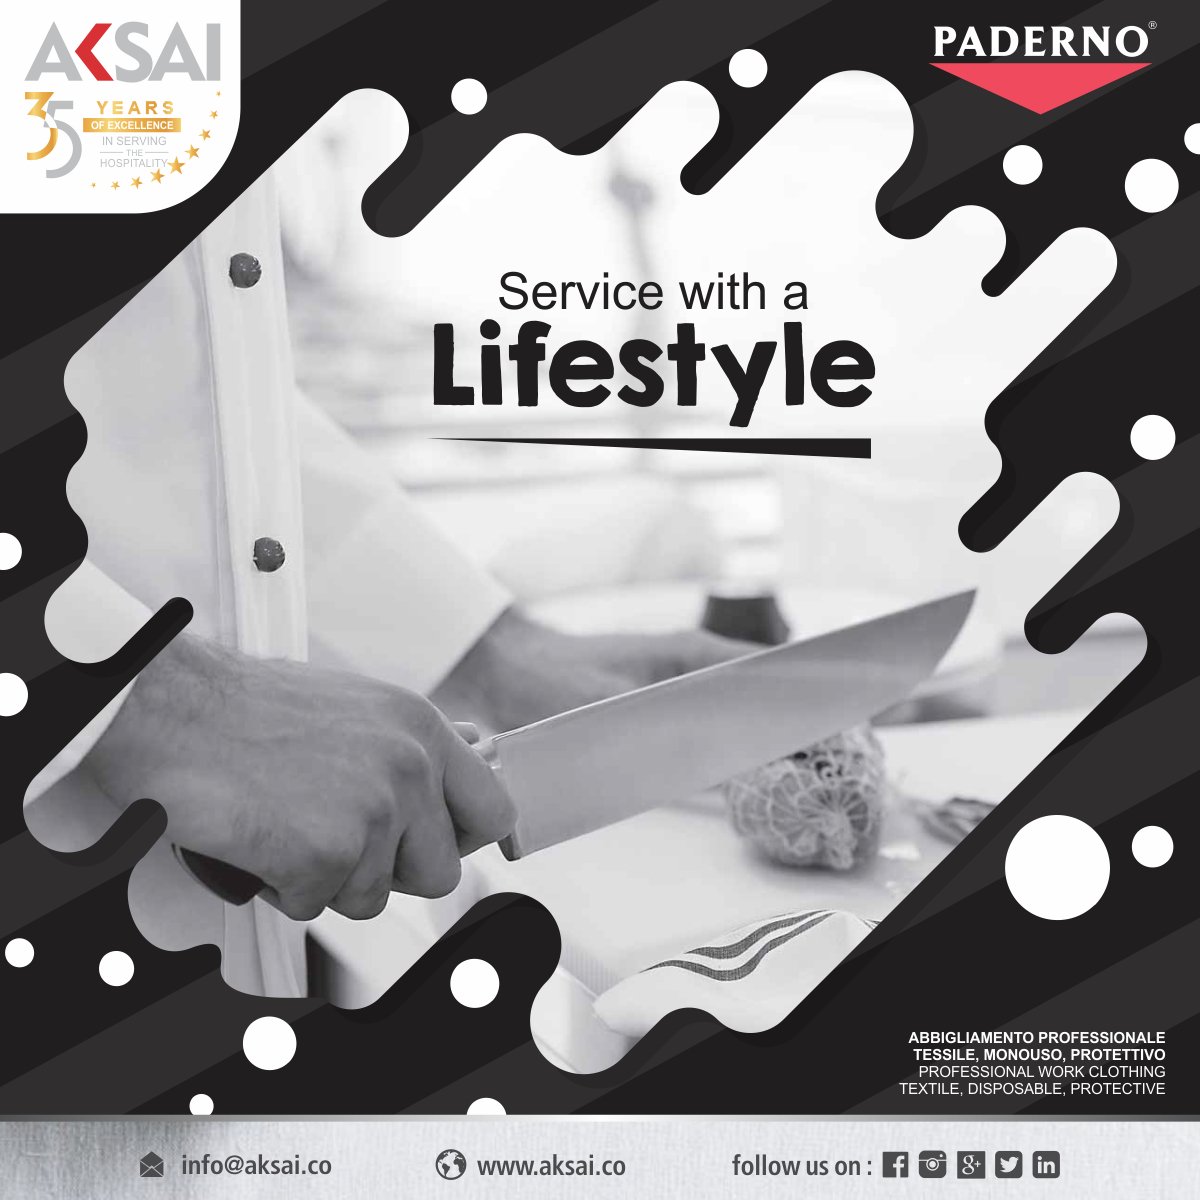 Iconic Canadian brand that gives you outstanding durability and performance
#Wednesday #aksaicreations #aksai #luxury #style #niche #35yearsofexcellence #cookware #bakeware #CuttingBoardsandAccessories #1979 #tableware #staytuned